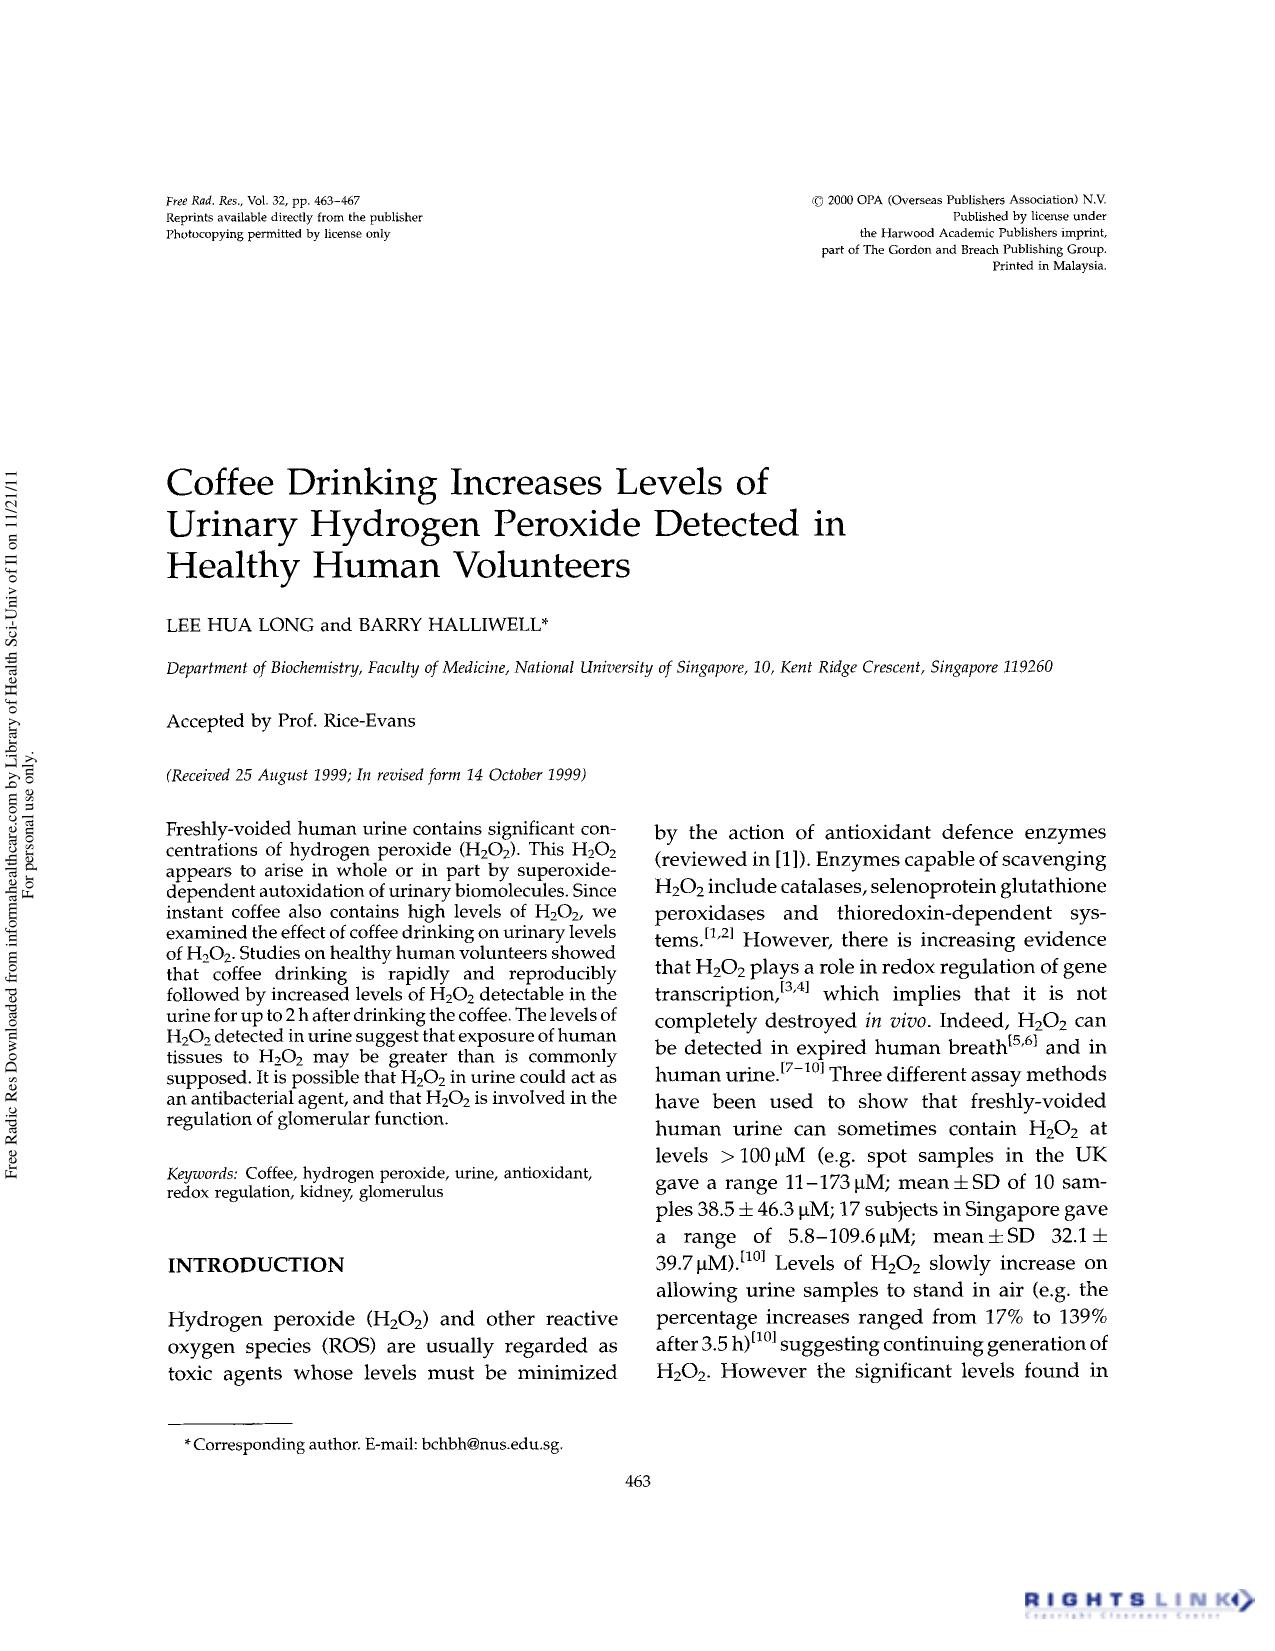 Coffee drinking increases levels of urinary hydrogen peroxide detected in healthy human volunteers by Lee Hua Long & Barry Halliwell